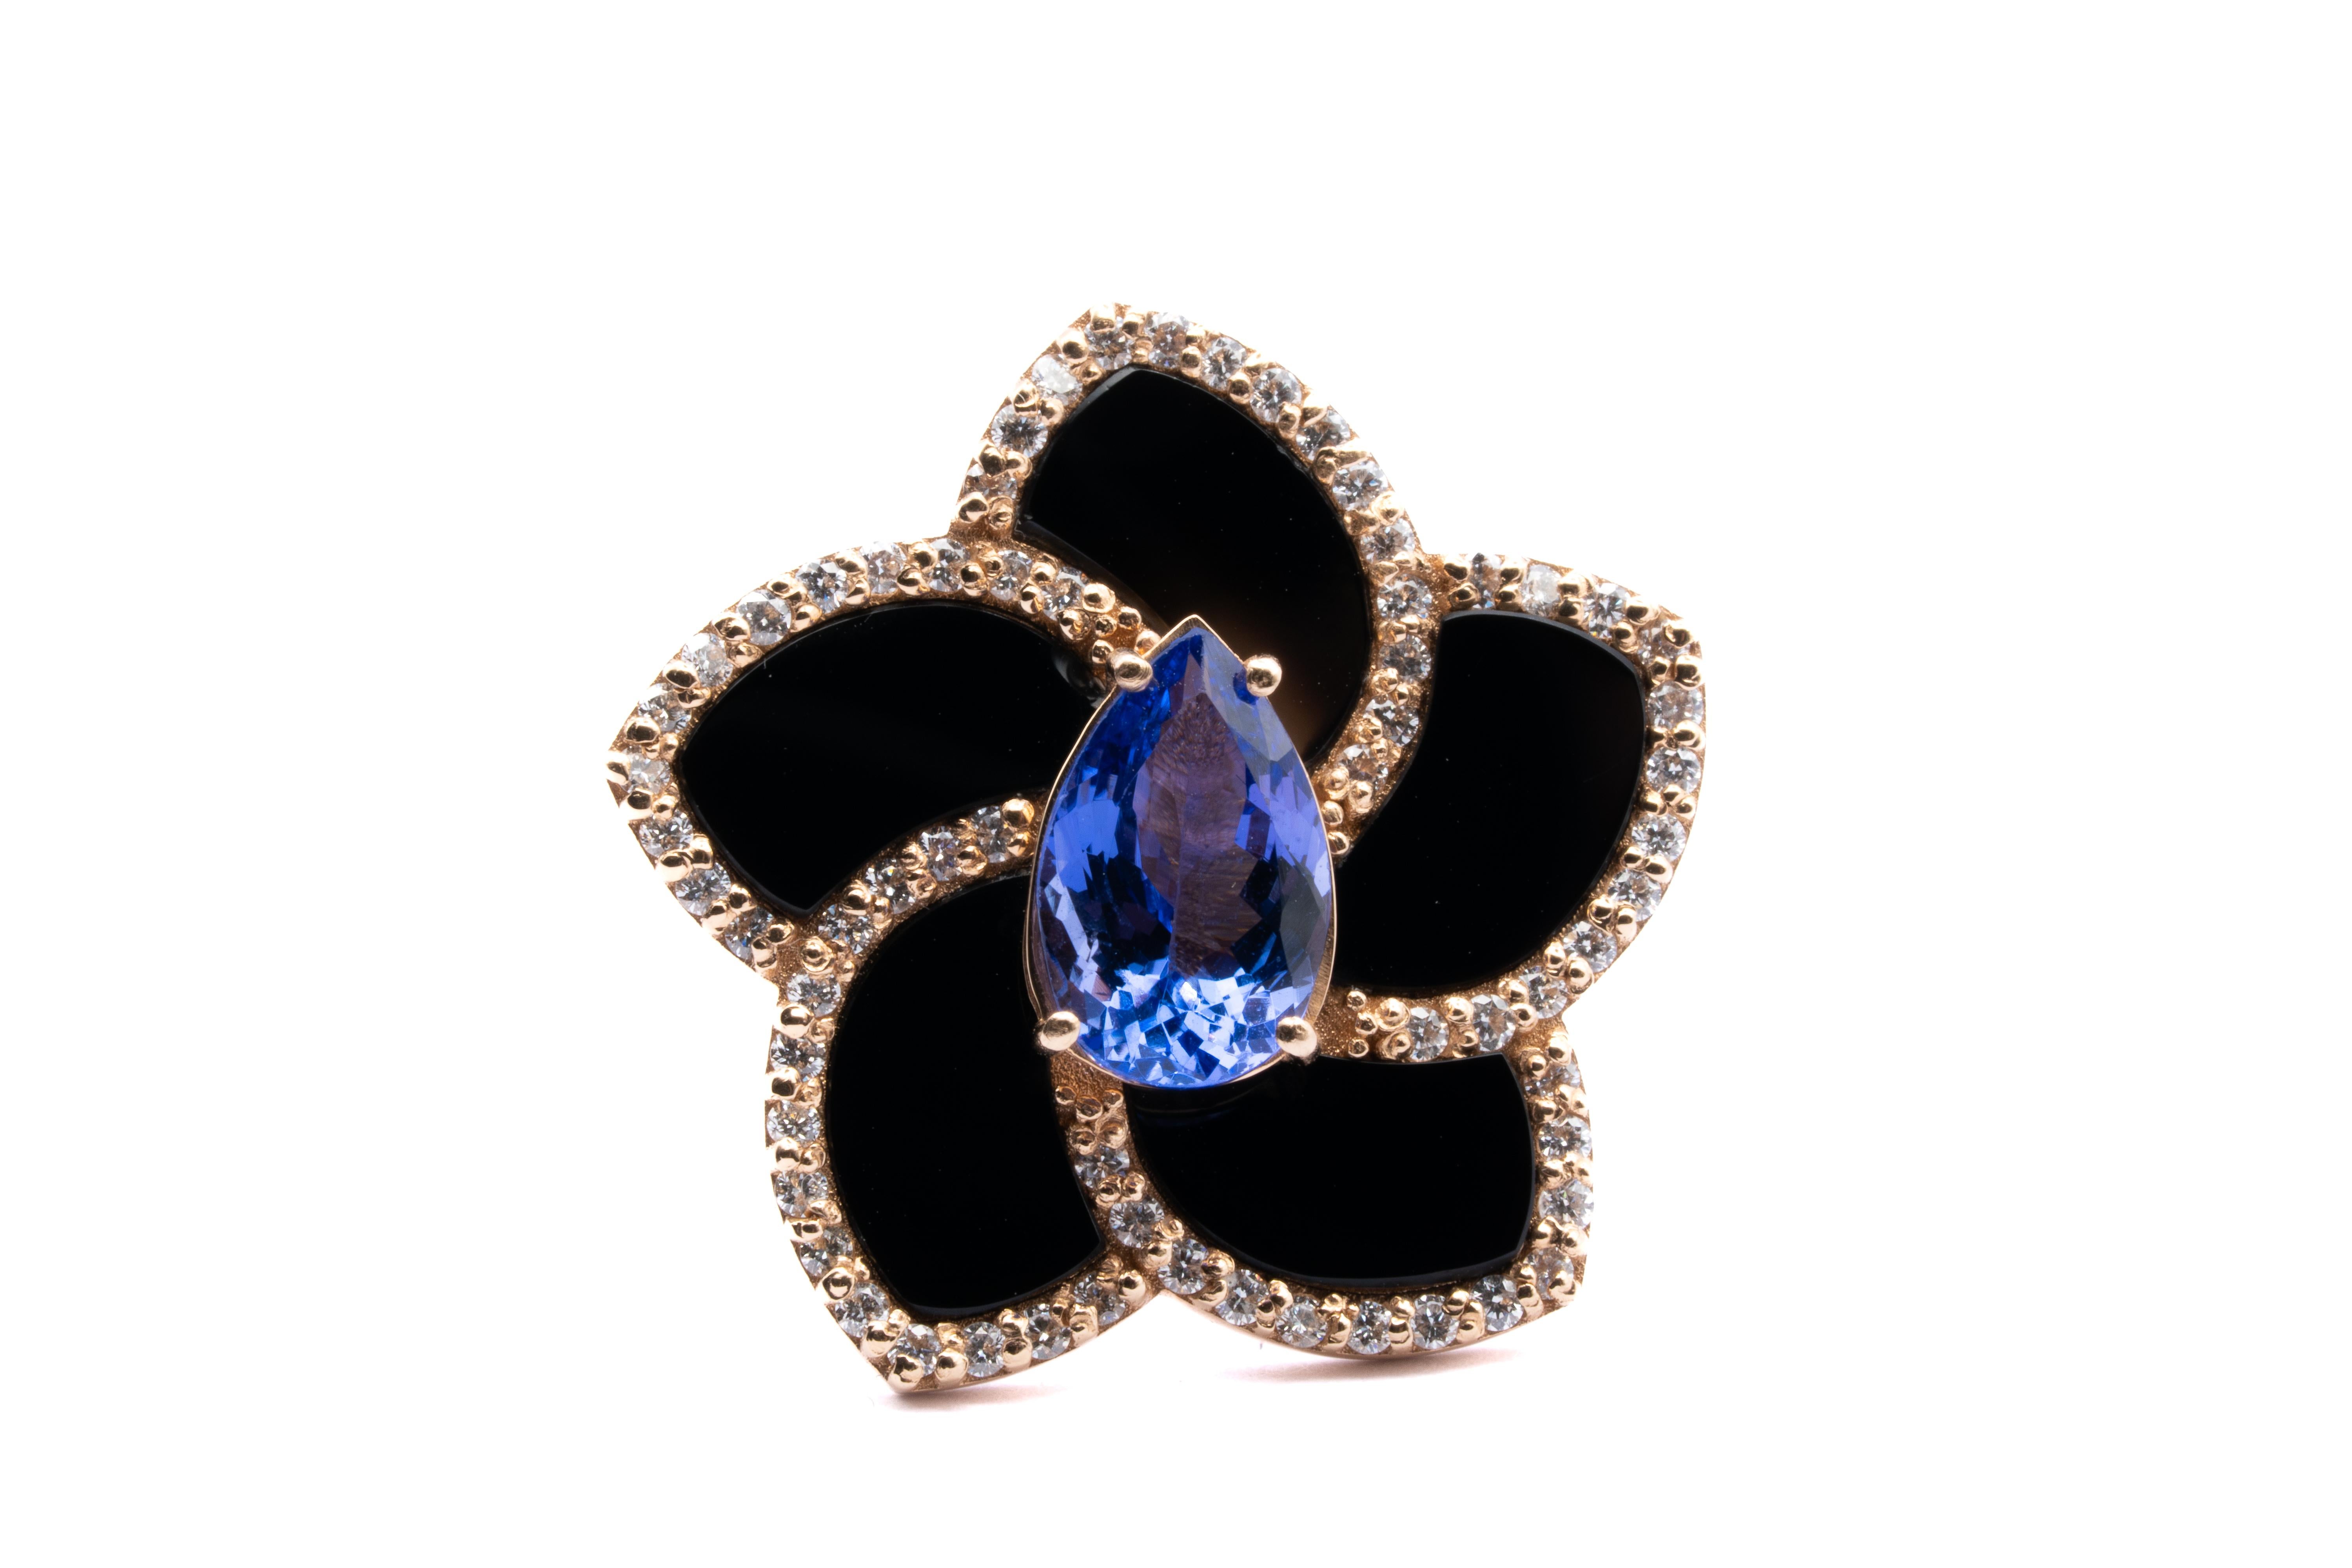 18 carat rose gold ring with onyx petals  stone and pear shape faceted tanzanite stone  Carat. 2.72 surrounded by brilliant cut diamonds with a Total weight of Carat 0.70, color G, clarity VS 1. 
any item of our jewelry collection has a dedicated